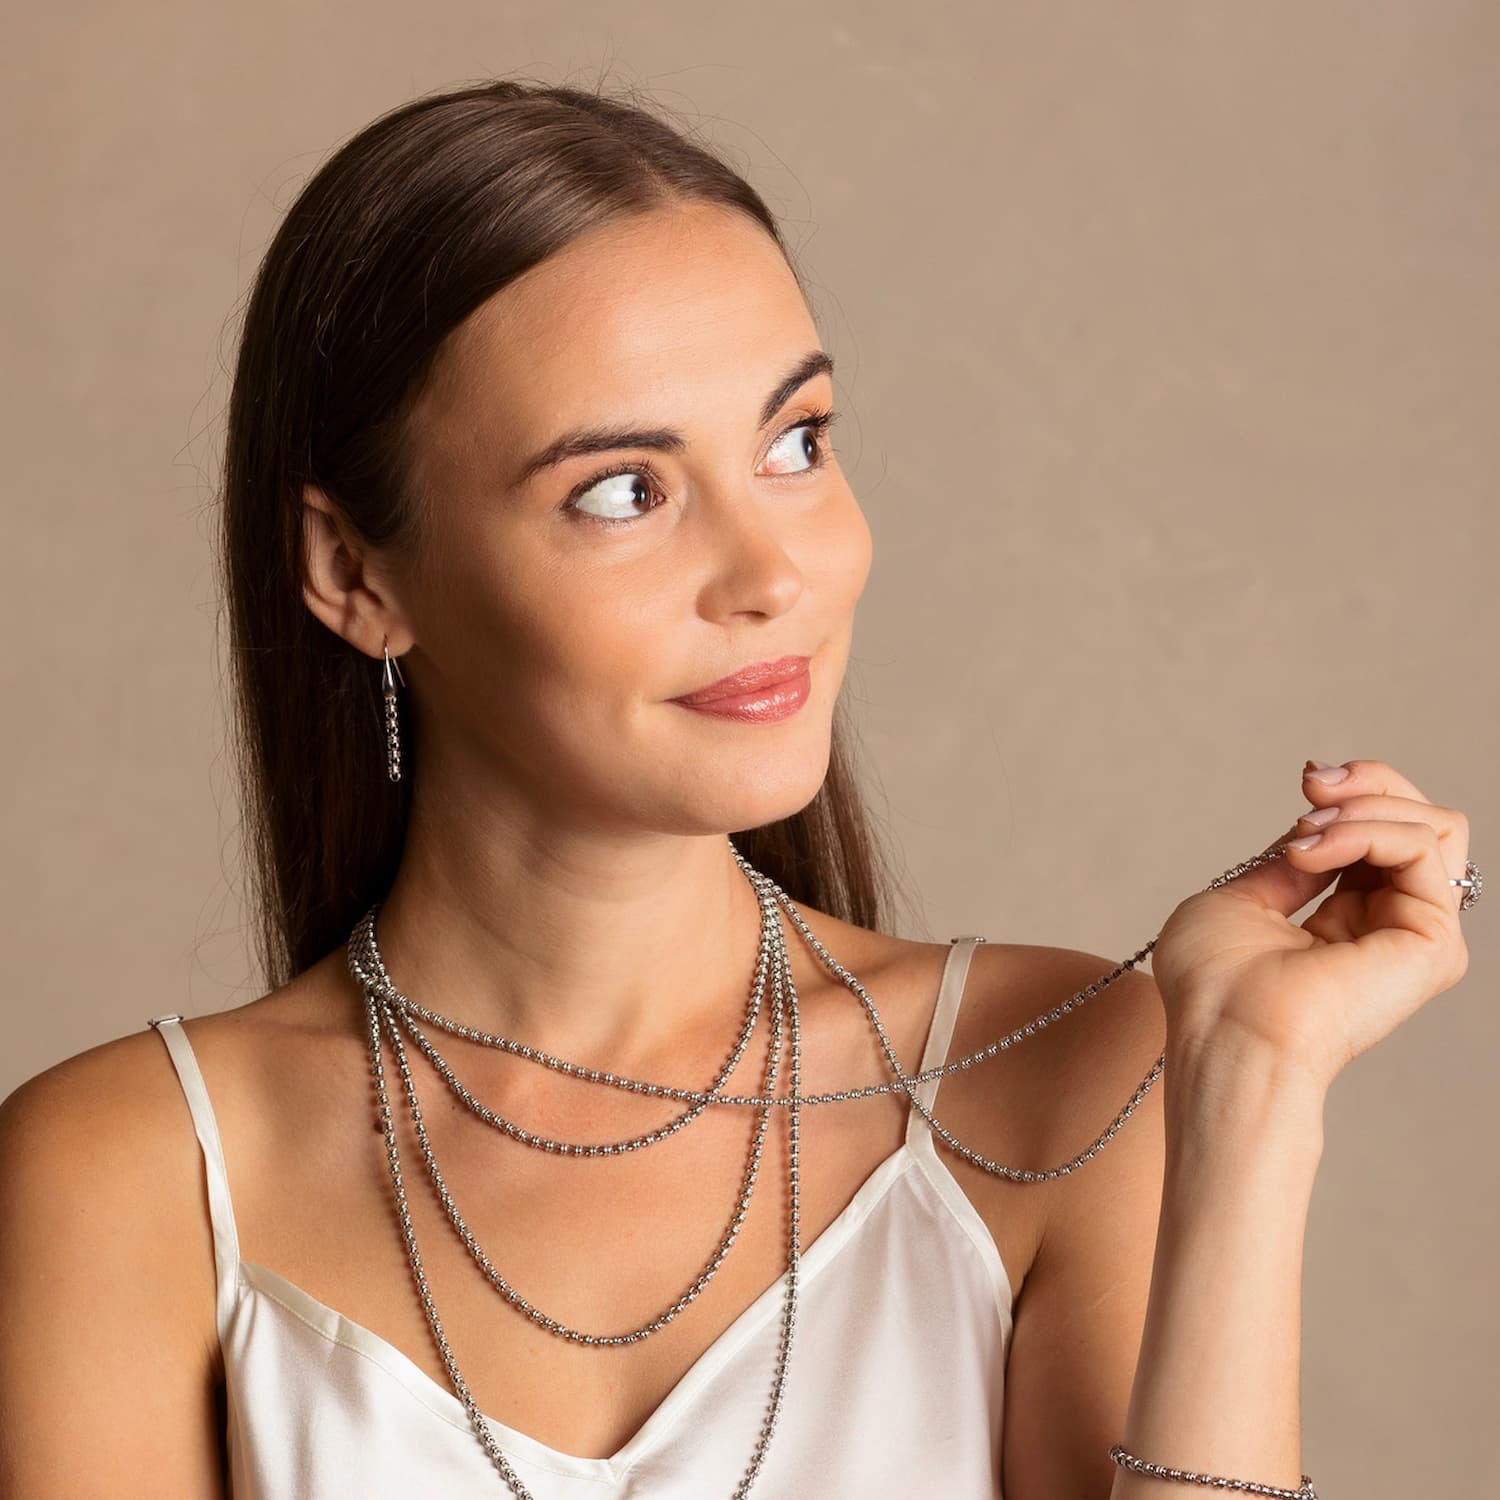 A model wearing long silver chain earrings, four silver chain necklaces, and a silver bracelet designed and hand-crafted by DelBrenna Italian Jewelers in Tuscany. The earrings are designed based on the iconic Links collection of DelBrenna silver chains, necklaces, rings, and bracelets.